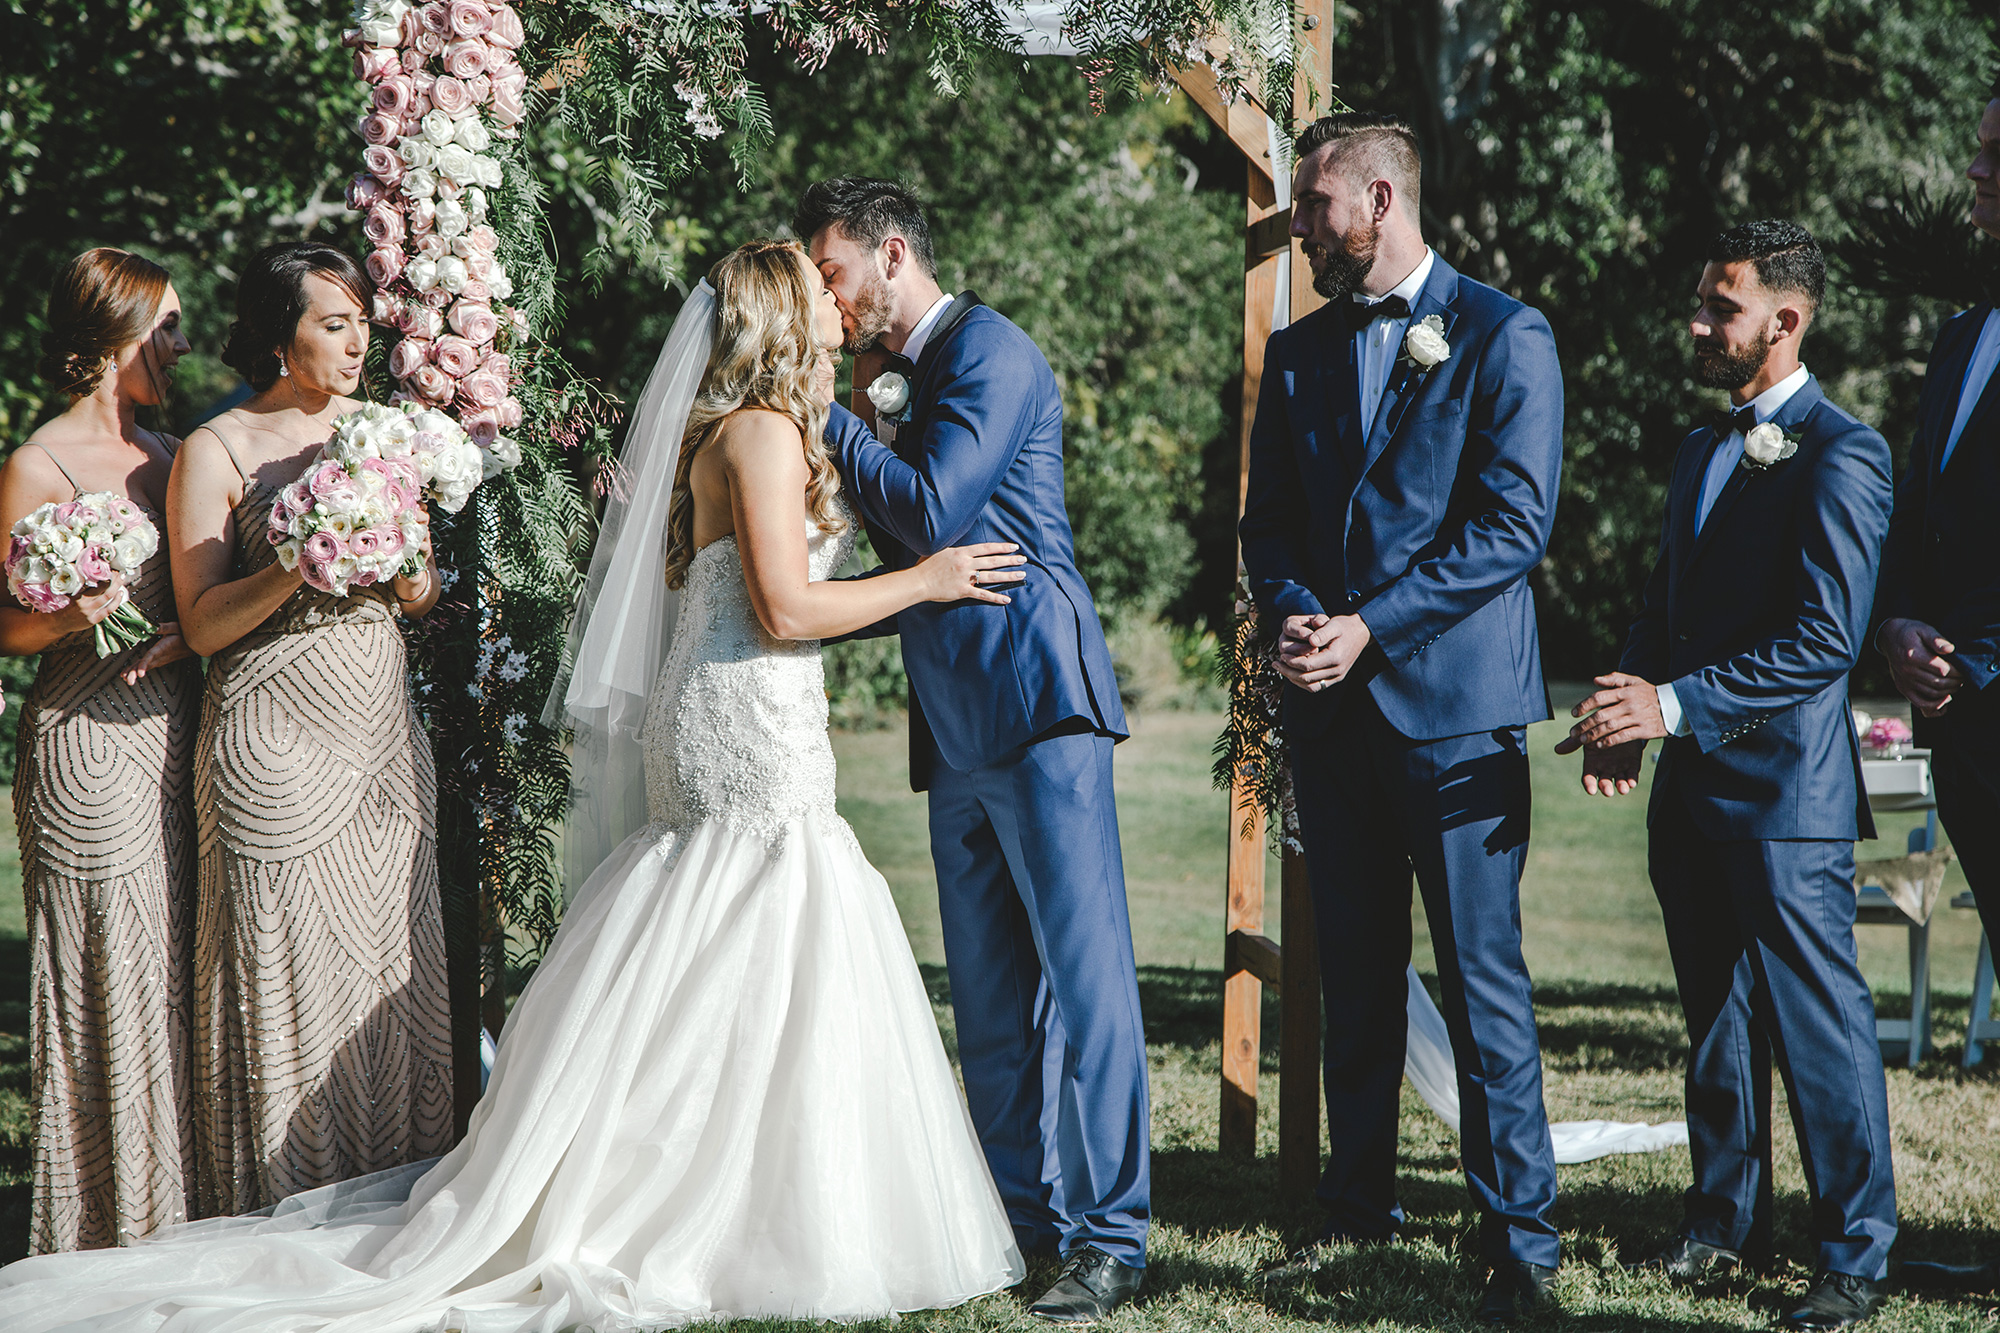 Camille_James_Rustic-Glam-Wedding_Pure-Image-Photography_034